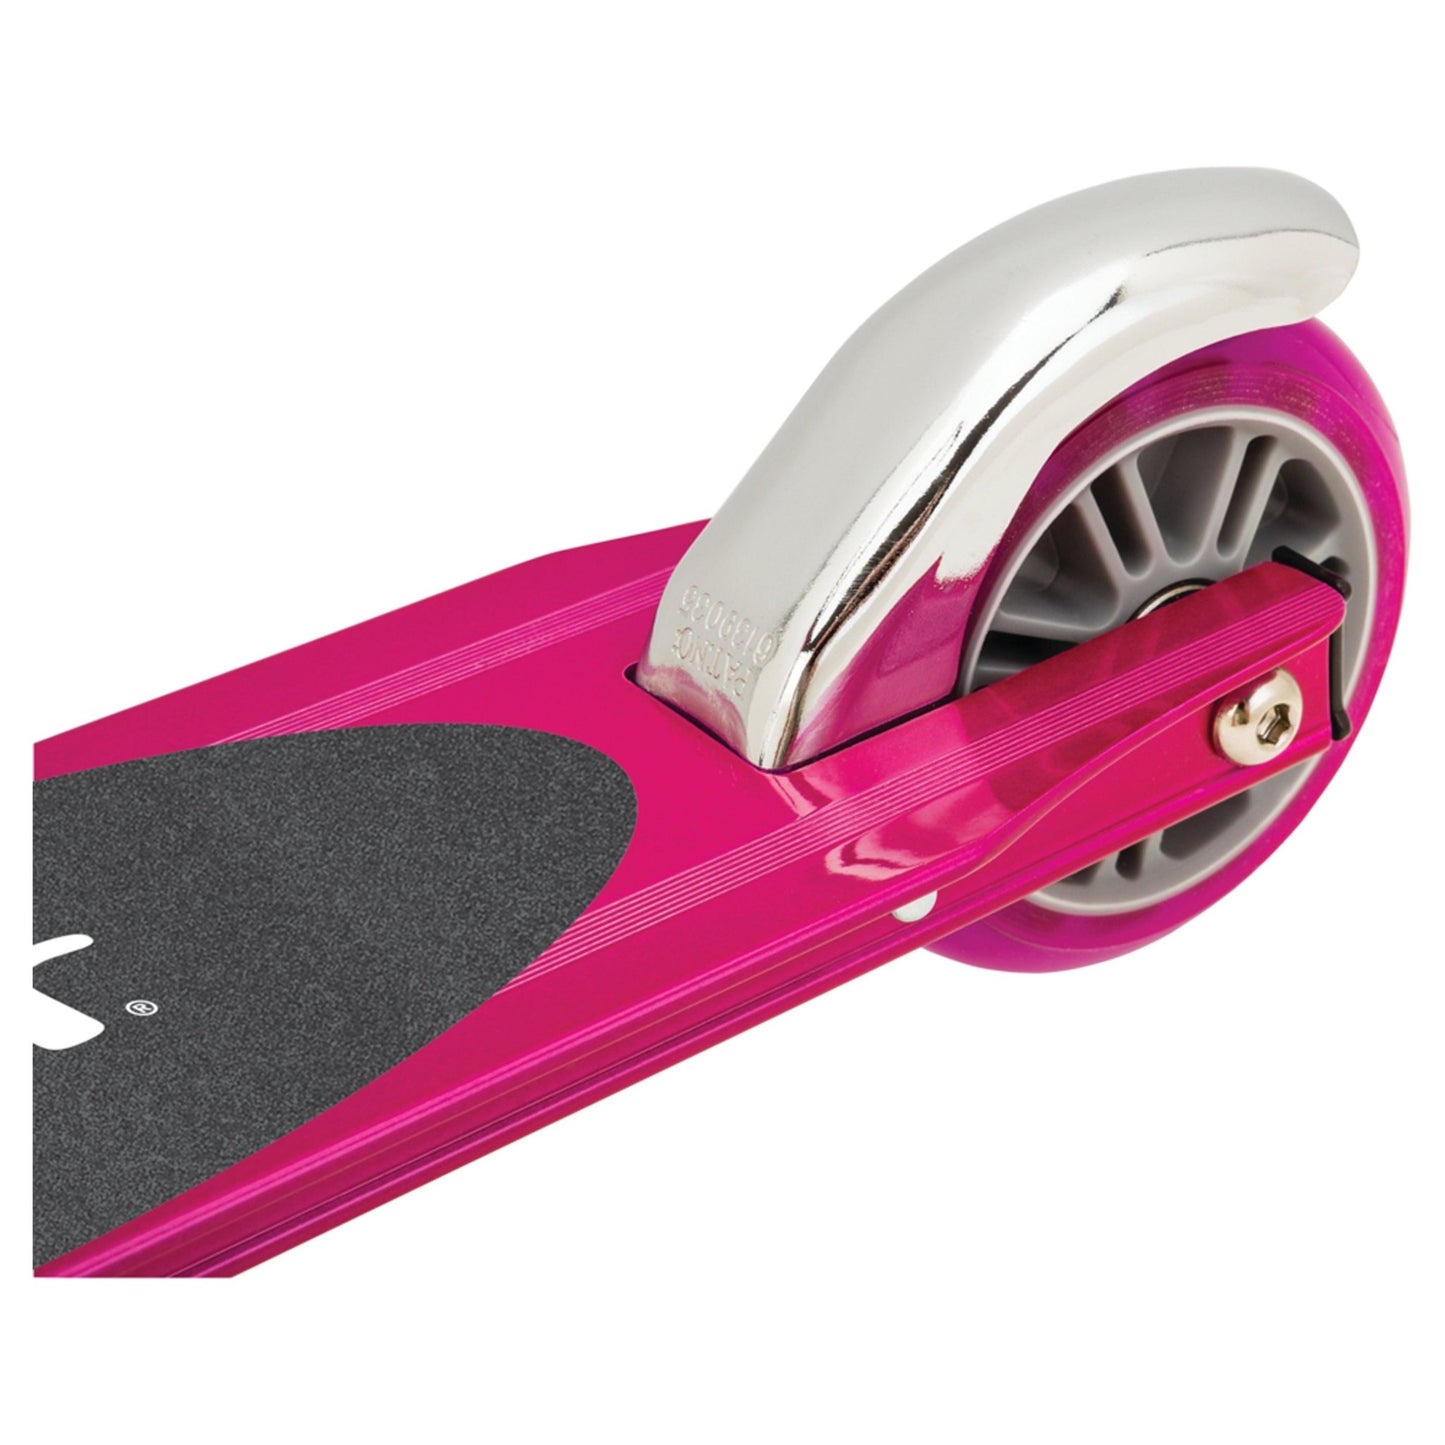 Razor S Sport Scooter - The Online Toy Shop - 2 Wheel Scooter - 1